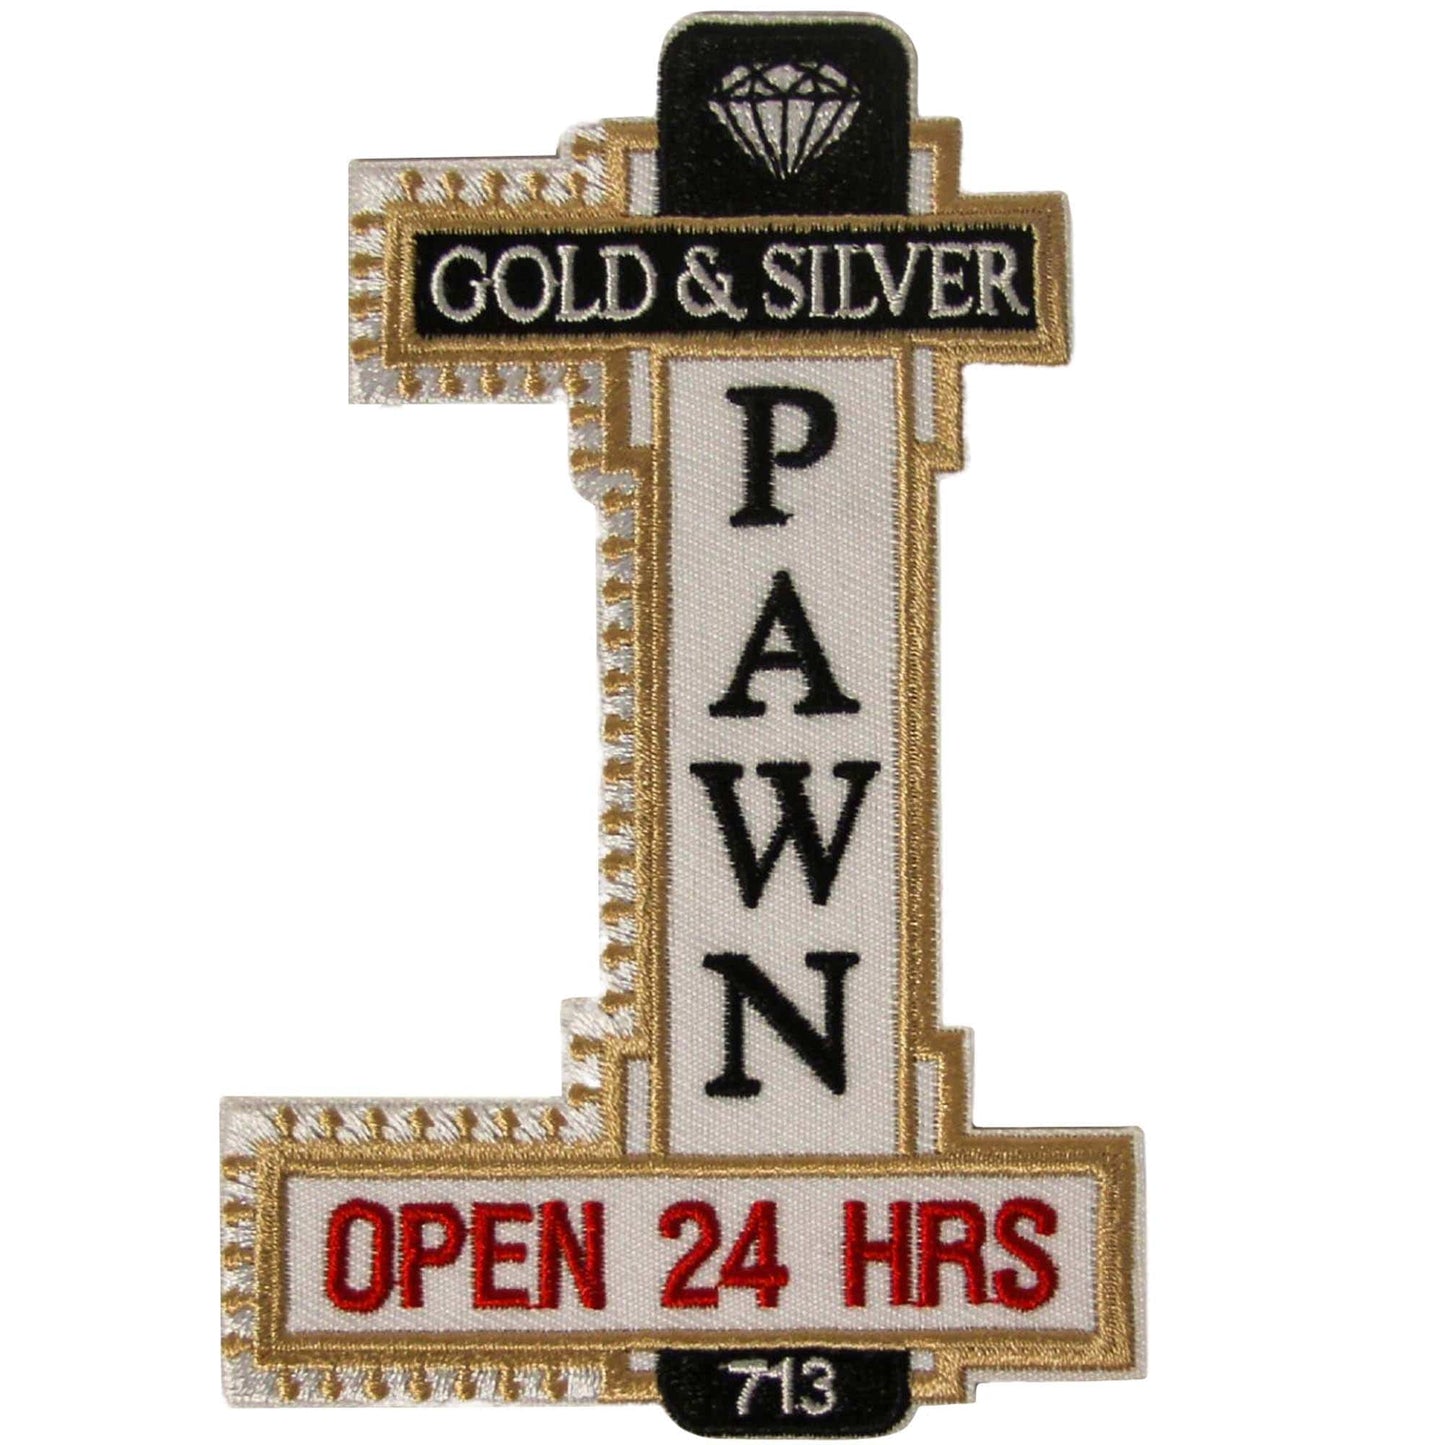 The World Famous Gold & Silver Pawn Shop Patches Pawn Shop Sign